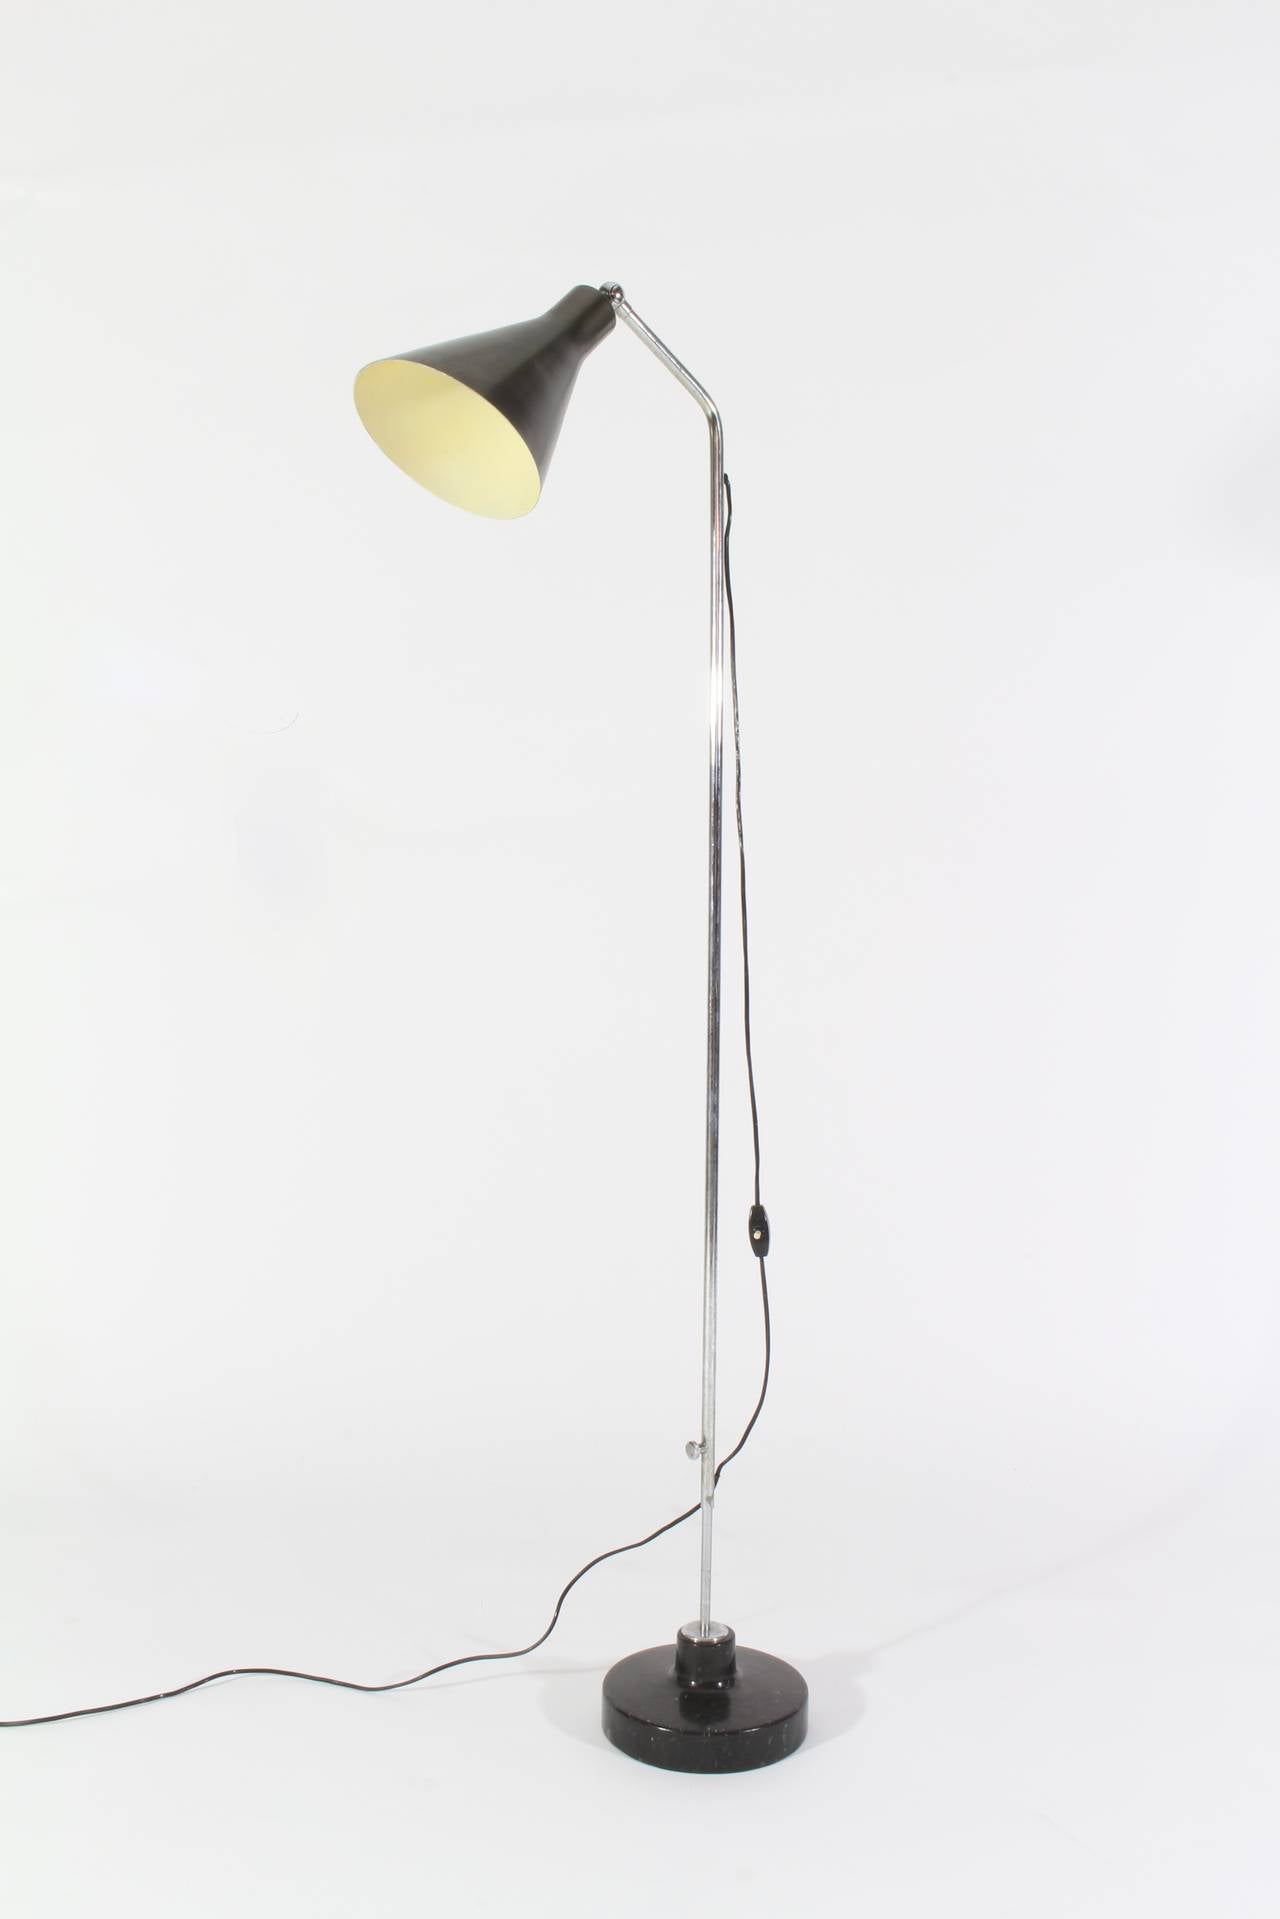 Ignazio Gardella.
Lte three floor lamp.
Floor lamp with marble base and first edition shade design.
Italy, 1950.
Manufactured by Azucena.
Marble, brass and aluminum.
Measures: 8 W x 18 D x 60 H inches.